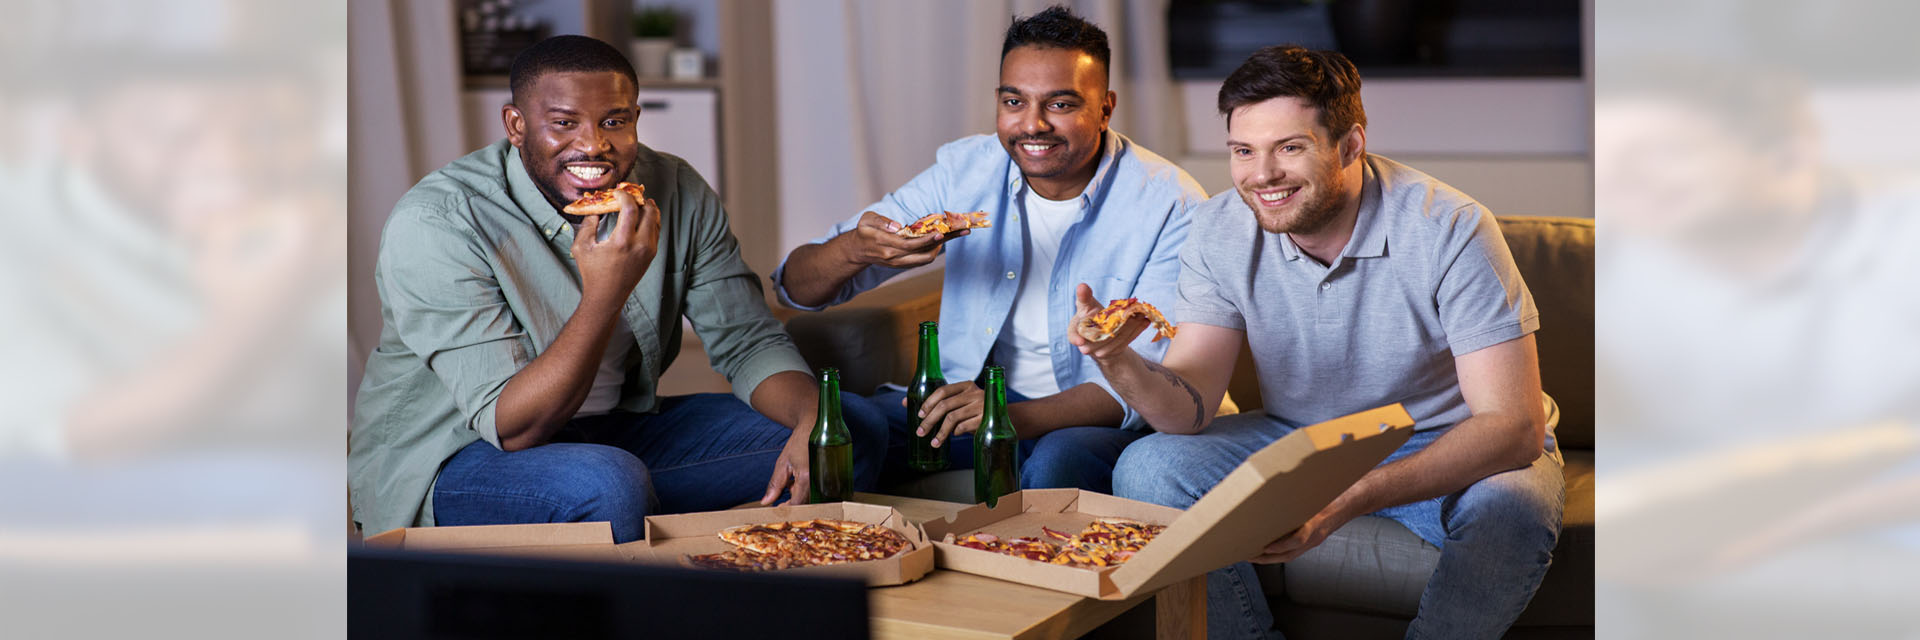 3 men eating pizza at table